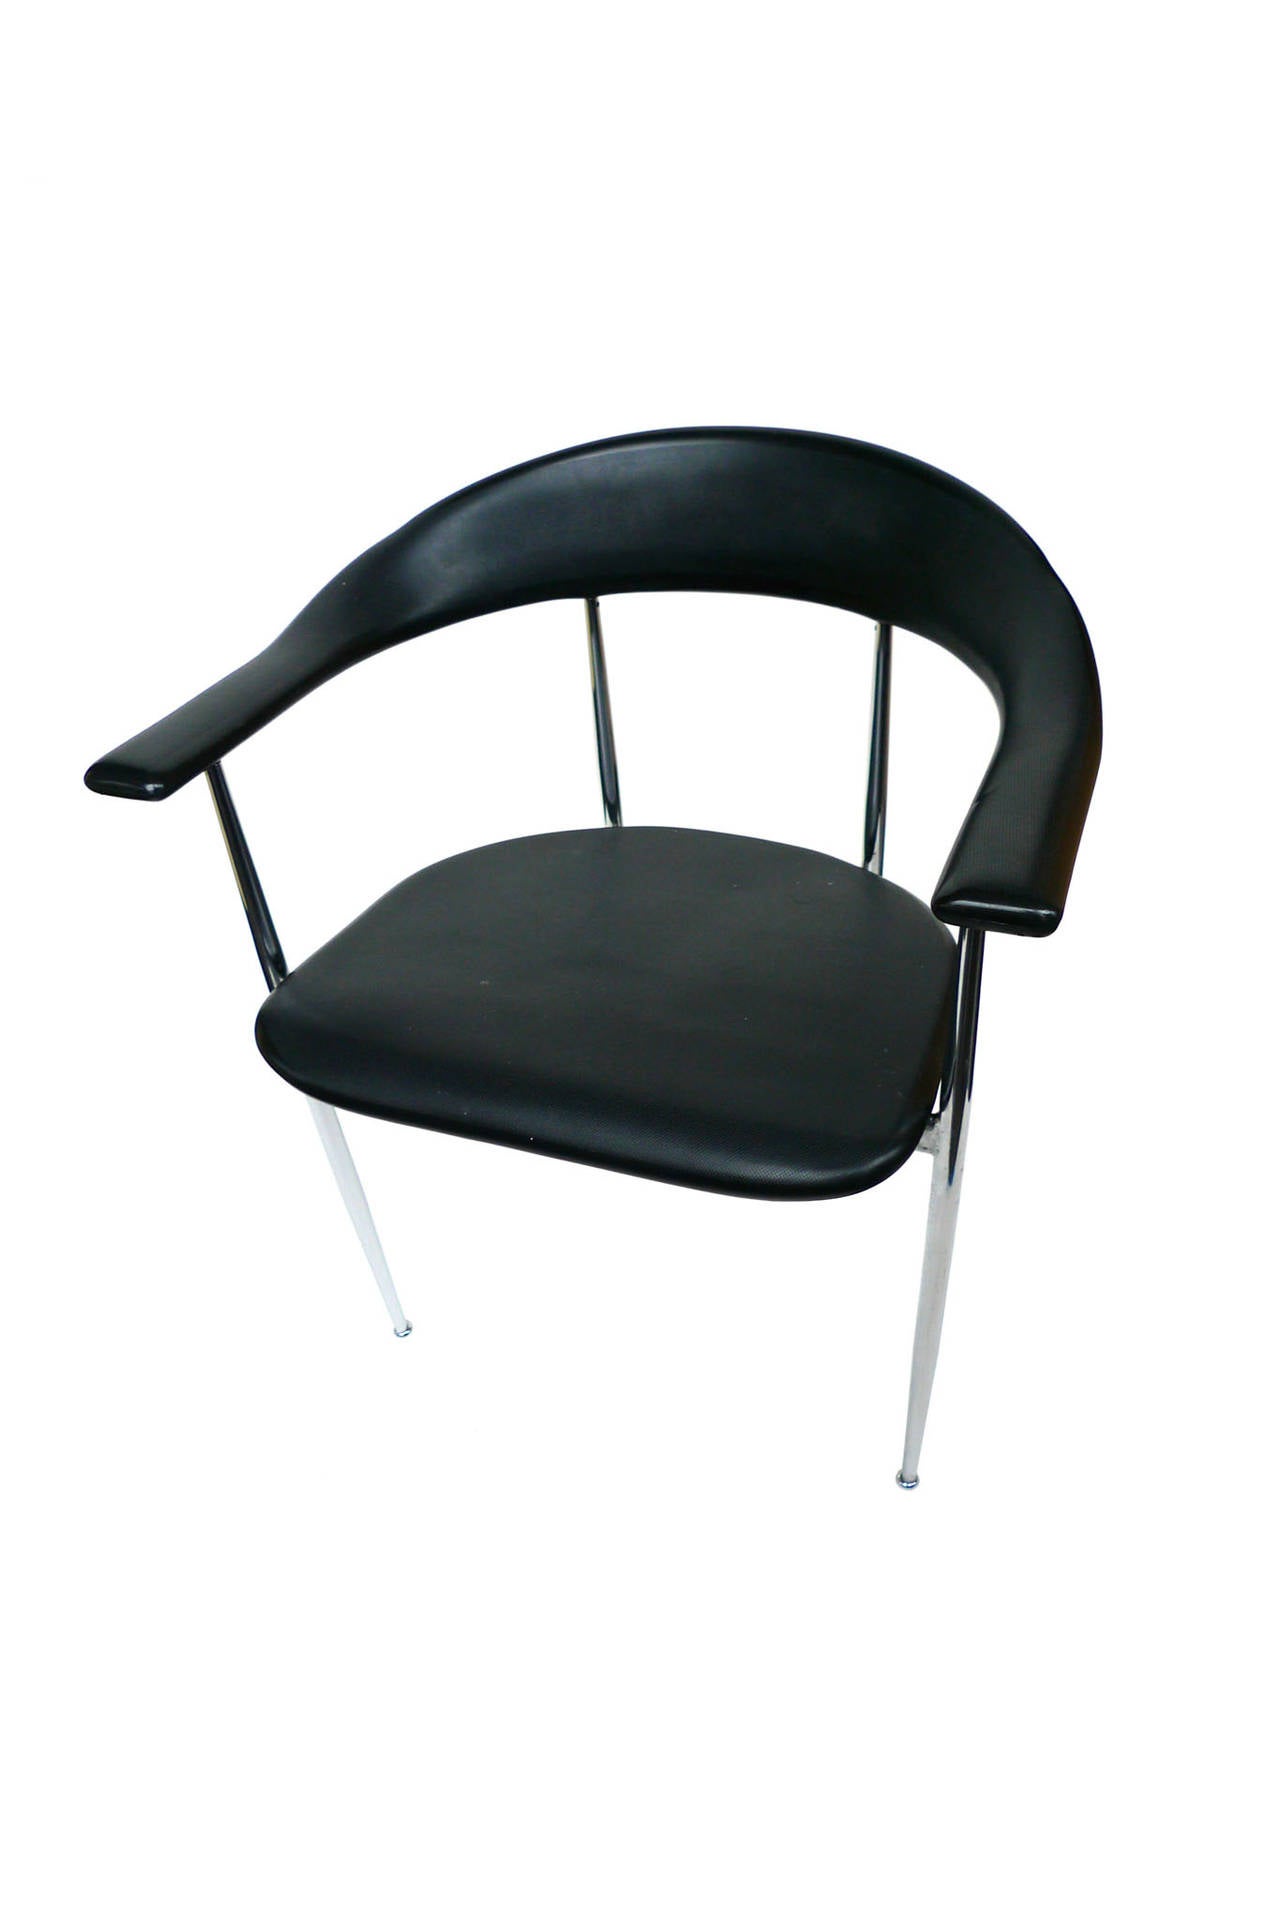 These 6 Minimalist Fasem dining chairs are comfortable and sturdy. The back and seat are molded black rubber, while the base and legs are chrome. Their design is noteworthy for the rounded edges, which accentuate the chairs' soft rubber material and